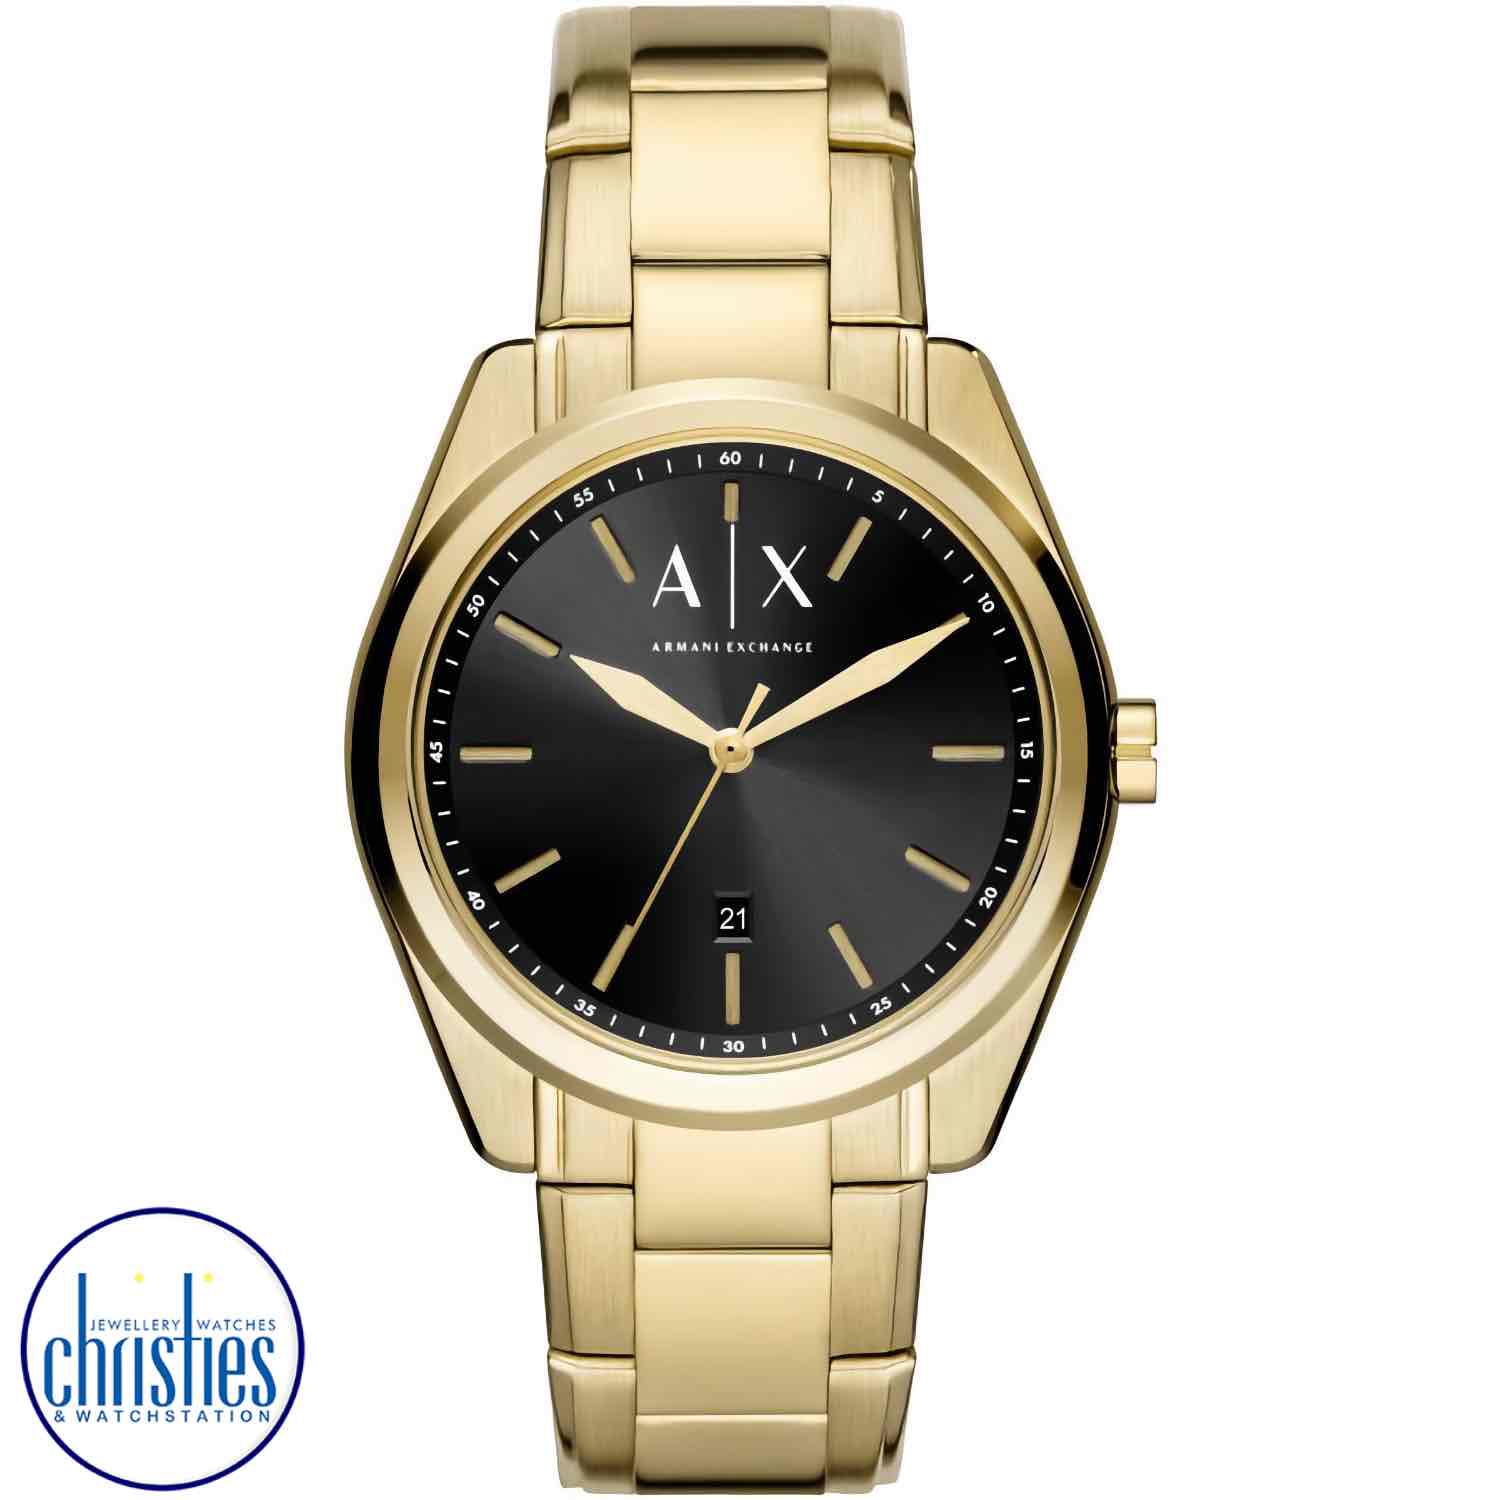 AX2857 A|X Armani Exchange Giacomo Watch. AX2857 A|X Armani Exchange Giacomo WatchAfterpay - Split your purchase into 4 instalments - Pay for your purchase over 4 instalments, due every two weeks.